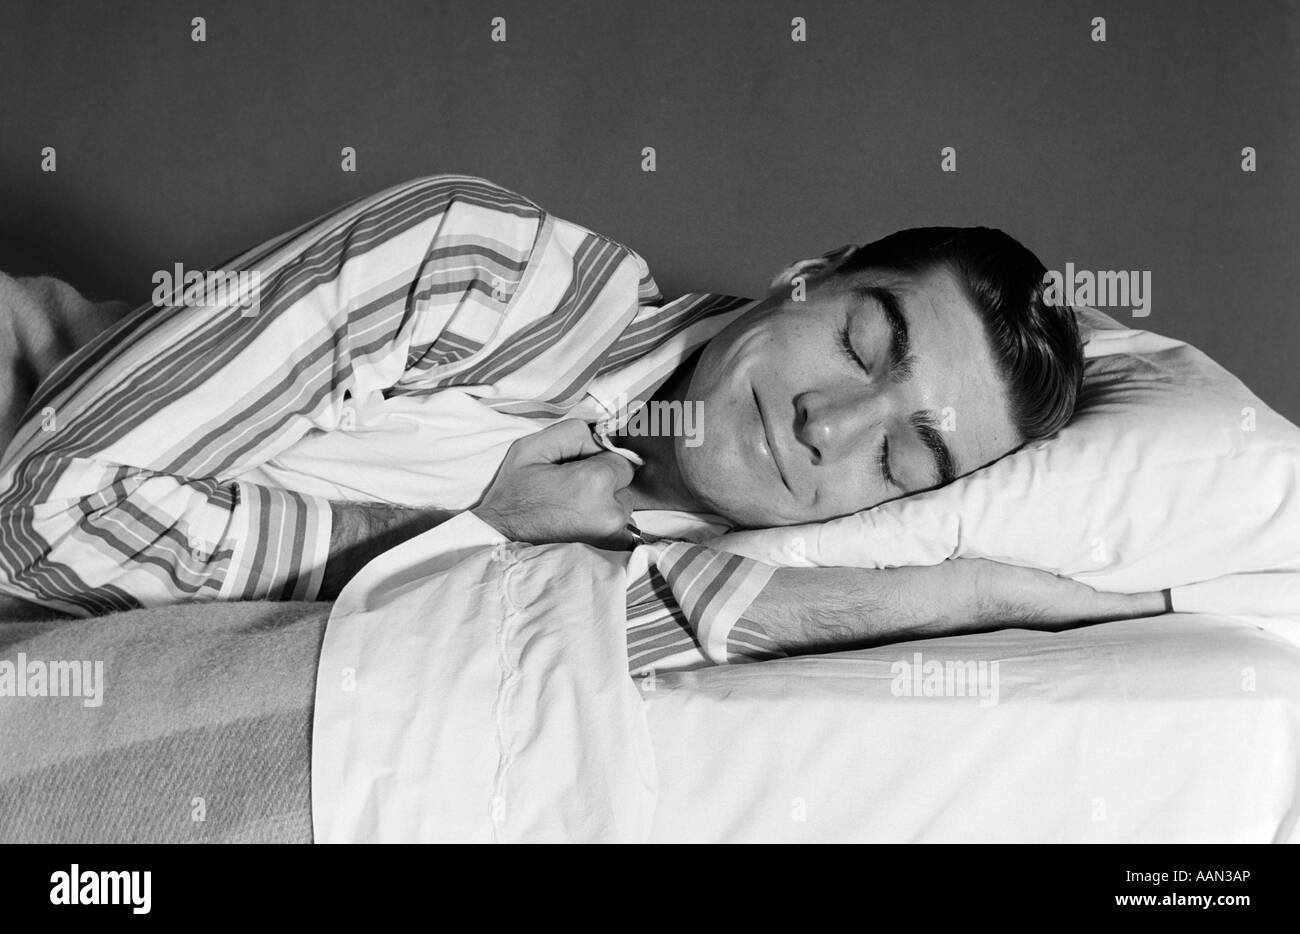 1950s 1960s MAN IN STRIPED PAJAMAS SMILING ASLEEP IN BED Stock Photo